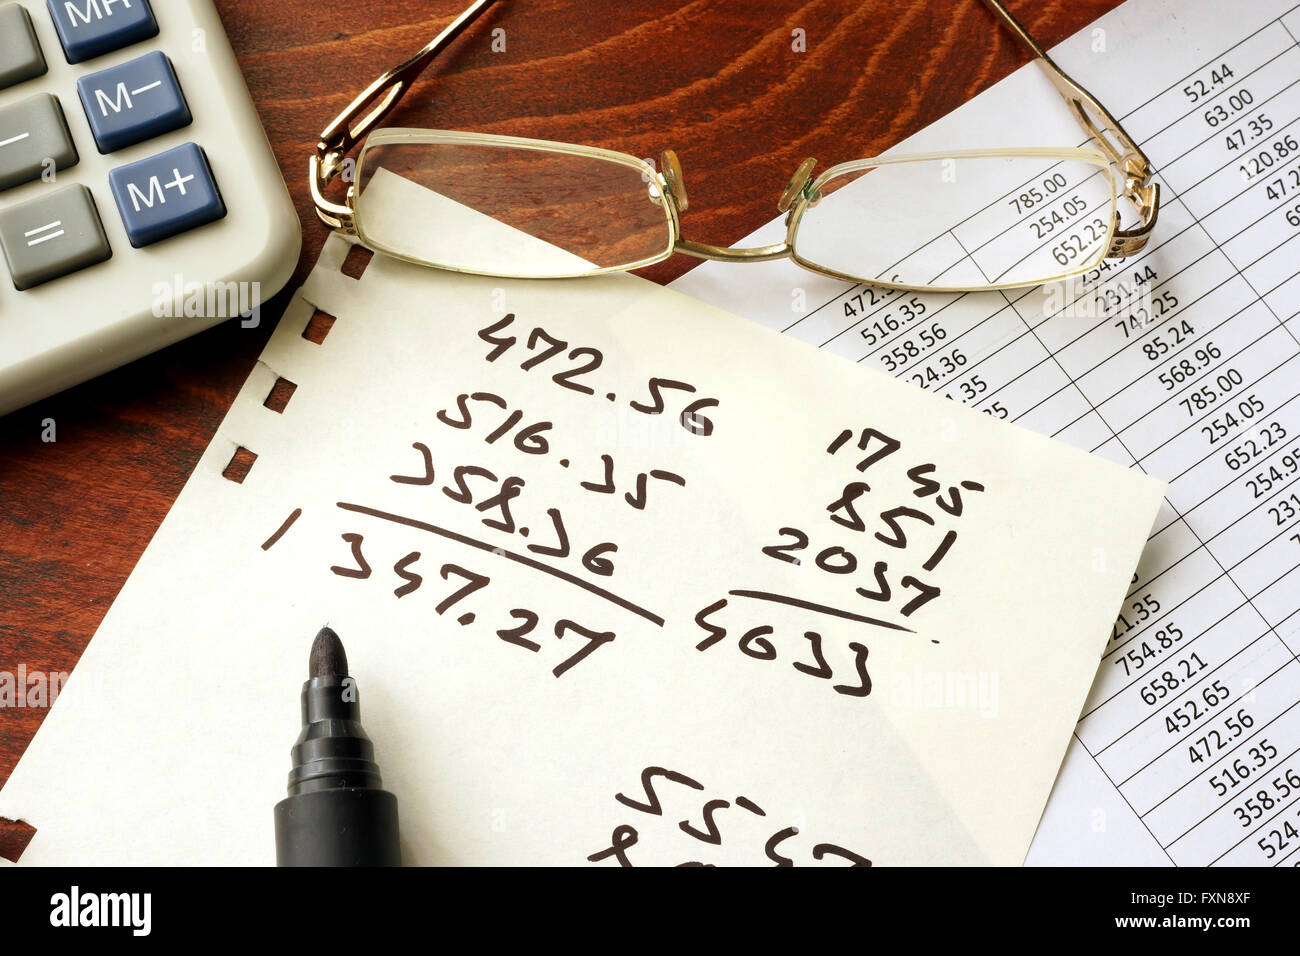 Business calculation concept. Papers with data and calculator. Stock Photo